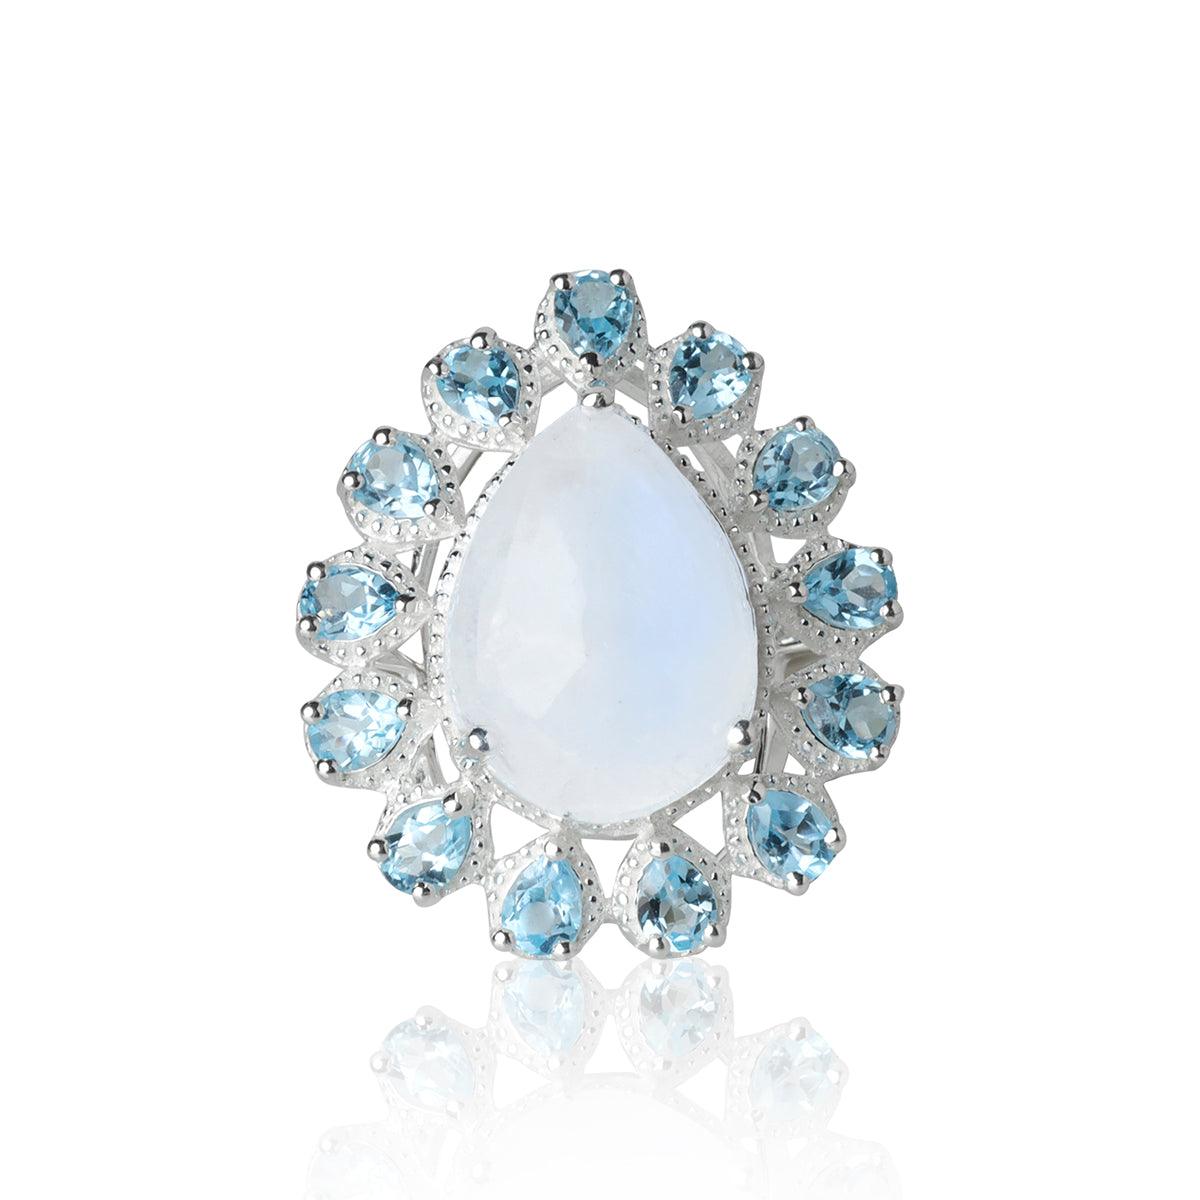 Moonstone & Swiss Blue Topaz Solid 925 Sterling Silver Statement Ring - YoTreasure